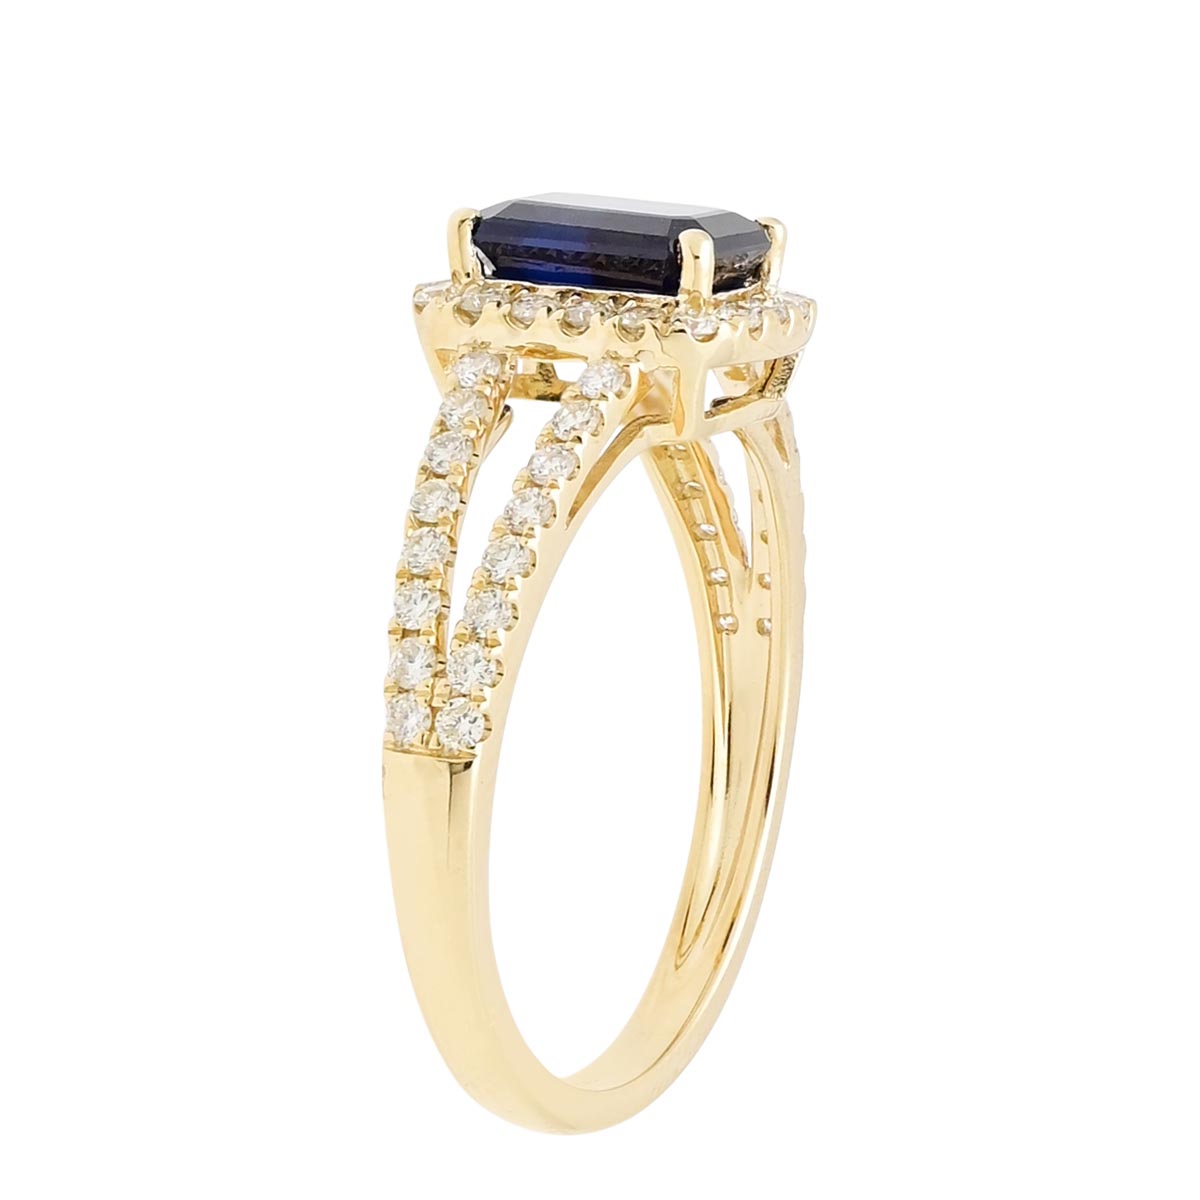 Emerald Cut Sapphire Ring in 14kt Yellow Gold with Diamonds (3/8ct tw)